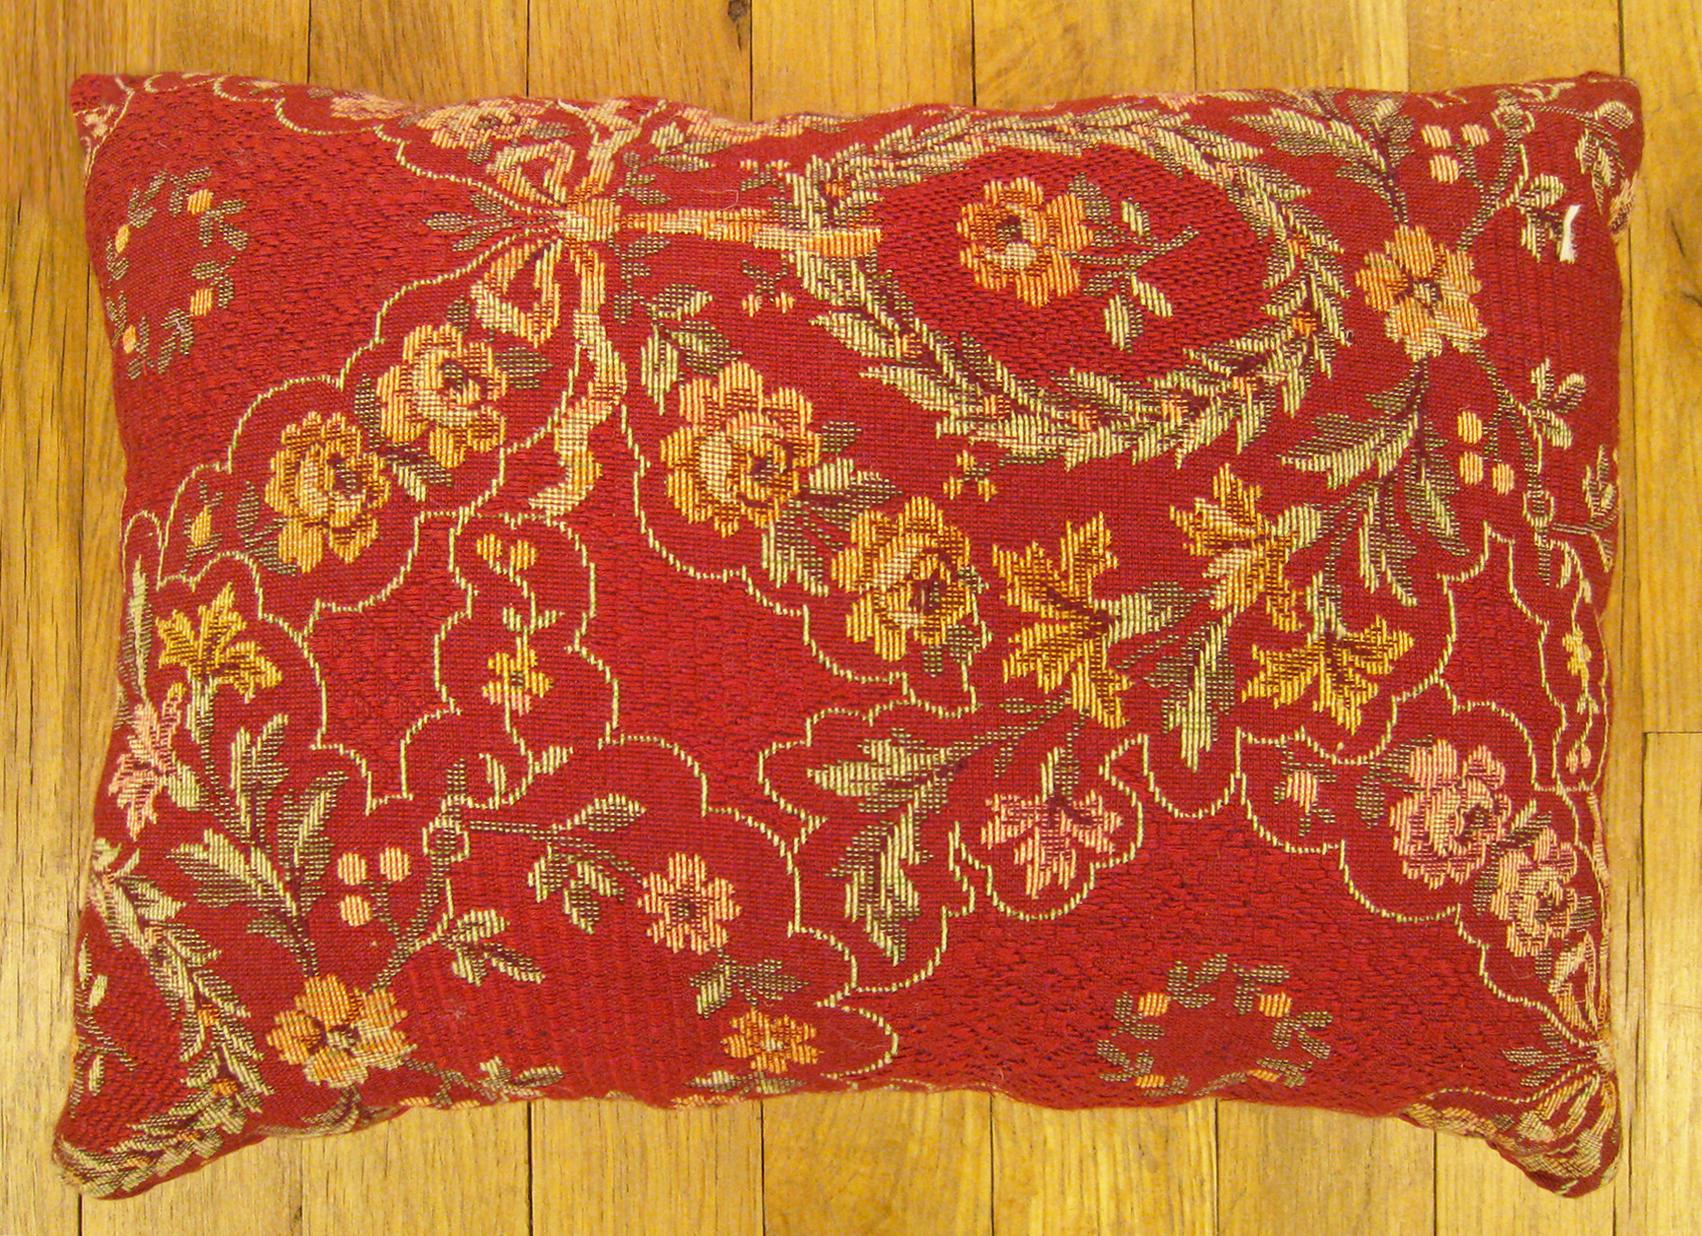 Antique Jacquard Tapestry Pillow; size 1'0” x 1'3”.

An antique decorative pillow with floral elements allover a red central field, size 1'0